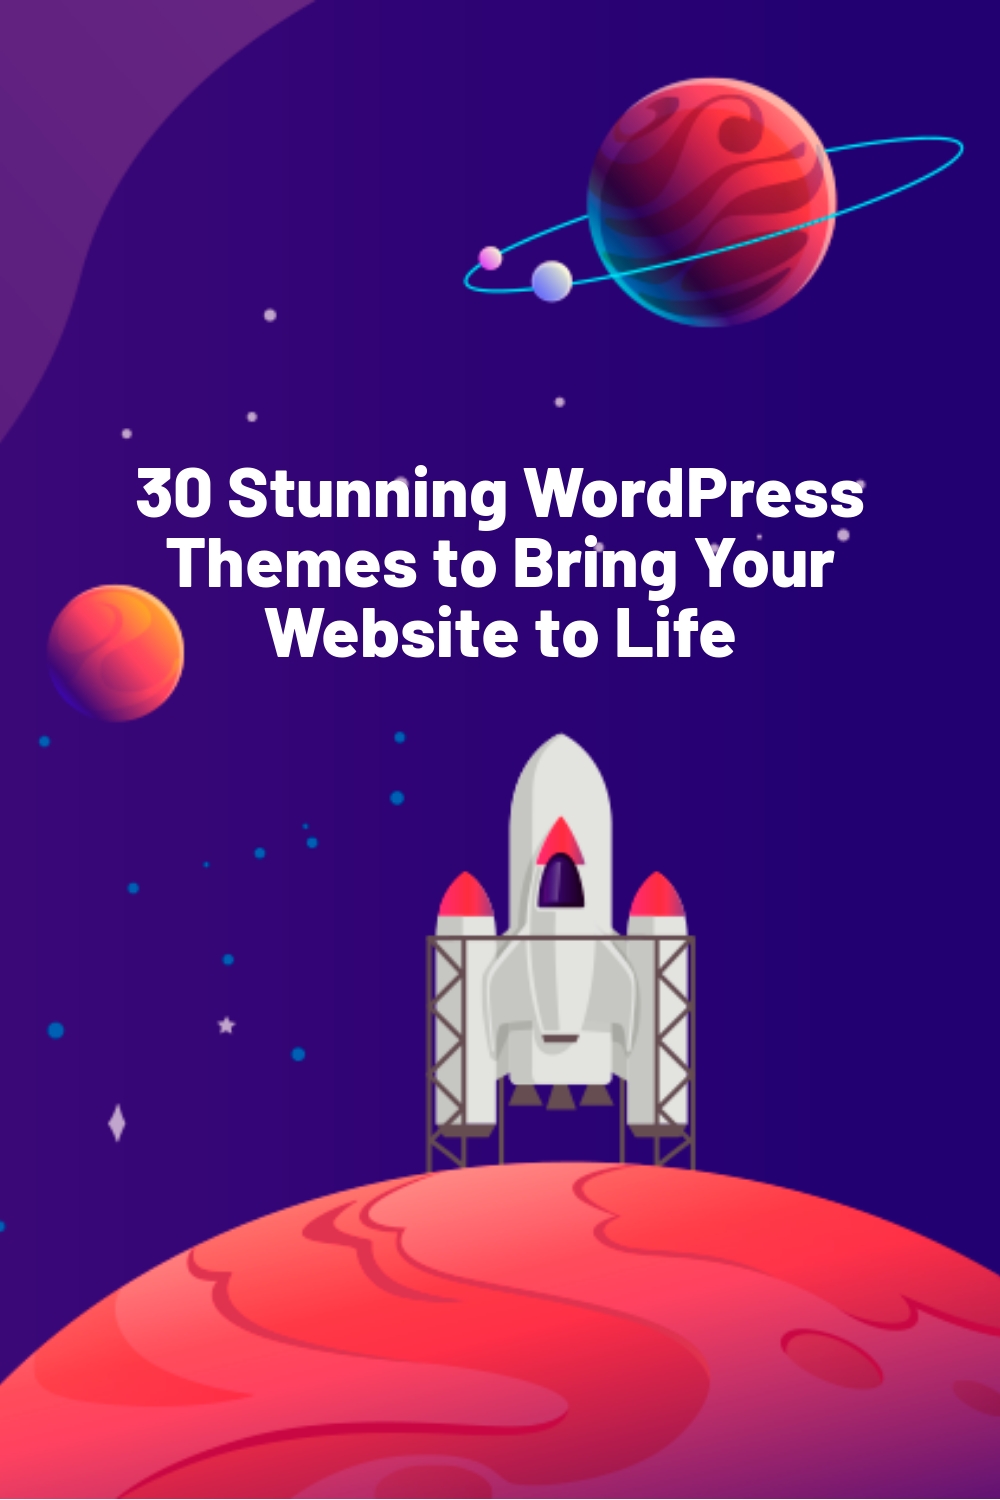 30 Stunning WordPress Themes to Bring Your Website to Life